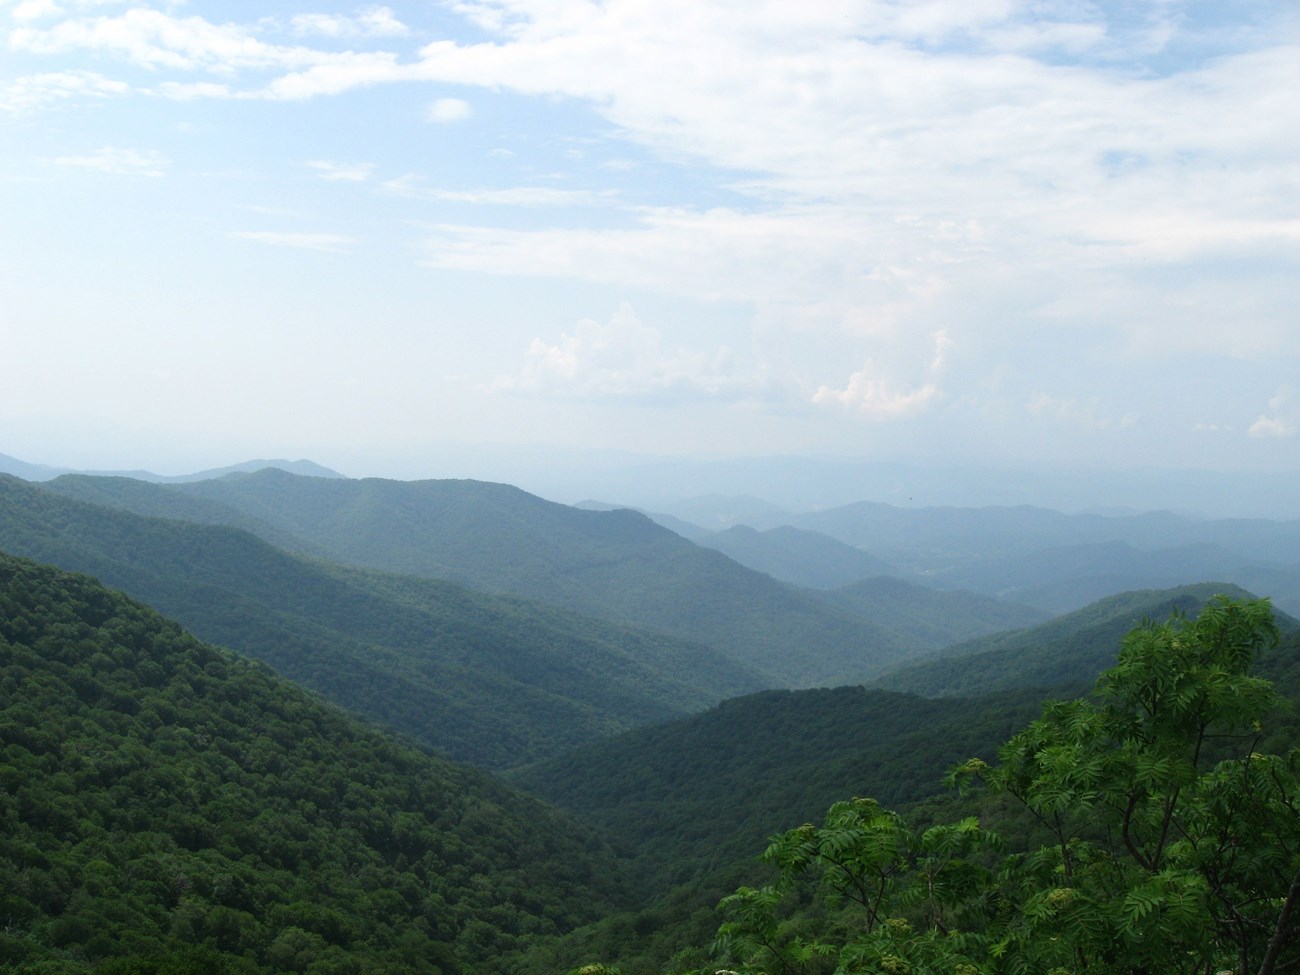 Large landscape view of rolling mountains--green and tree-covered in foreground, blue and misty in background